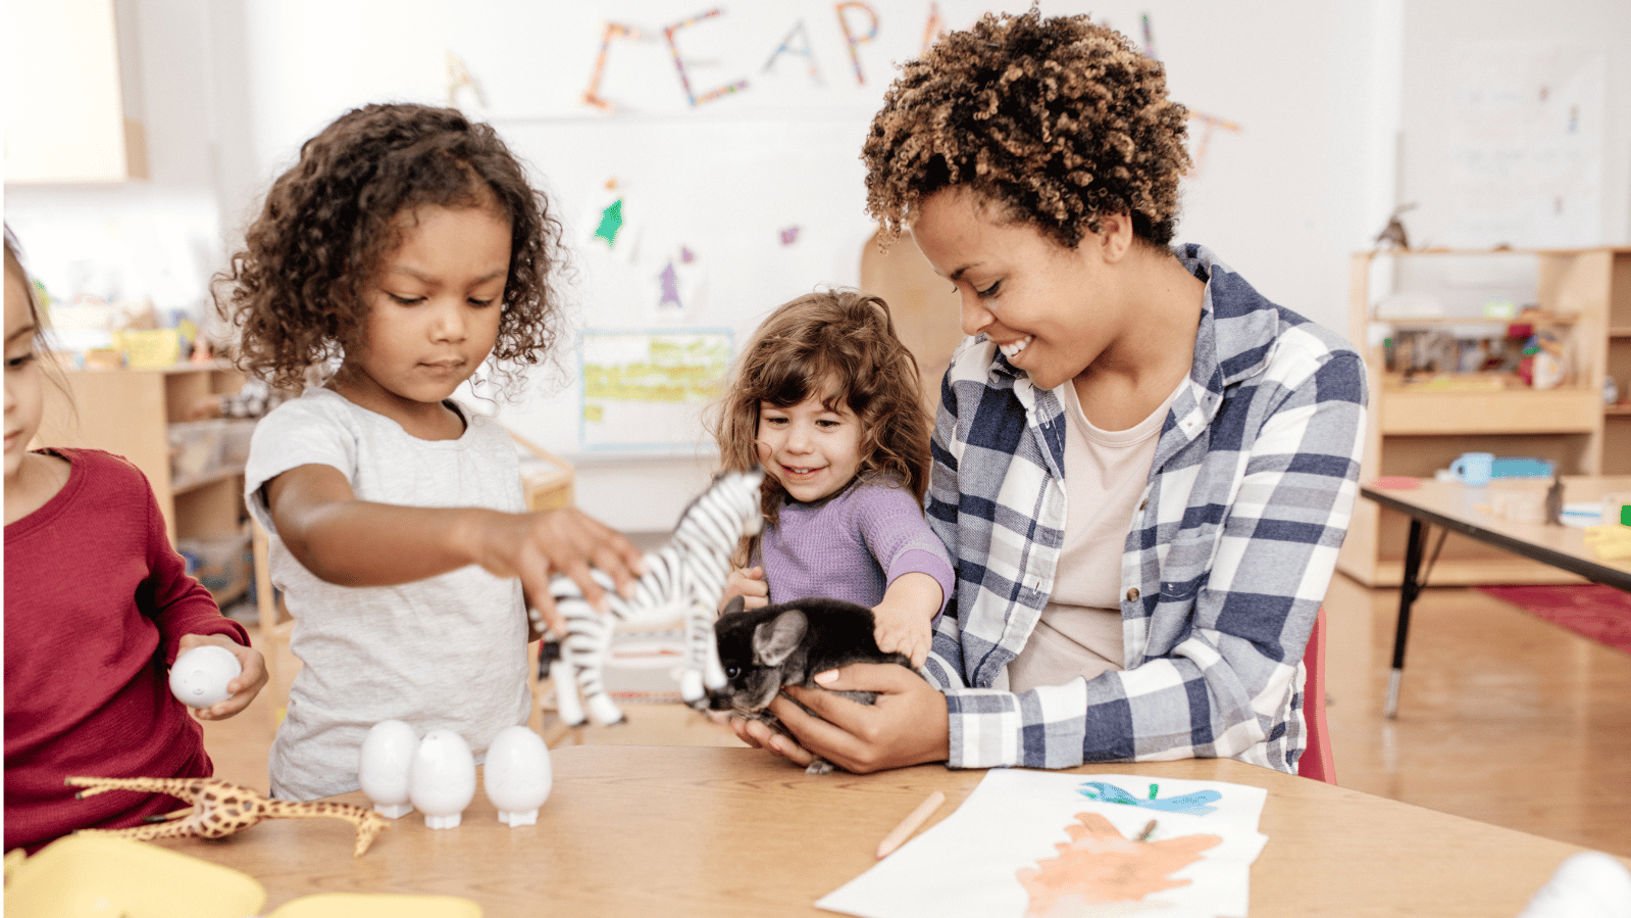 7 Proven Strategies to Grow Your Home Daycare into a Thriving Daycare Center